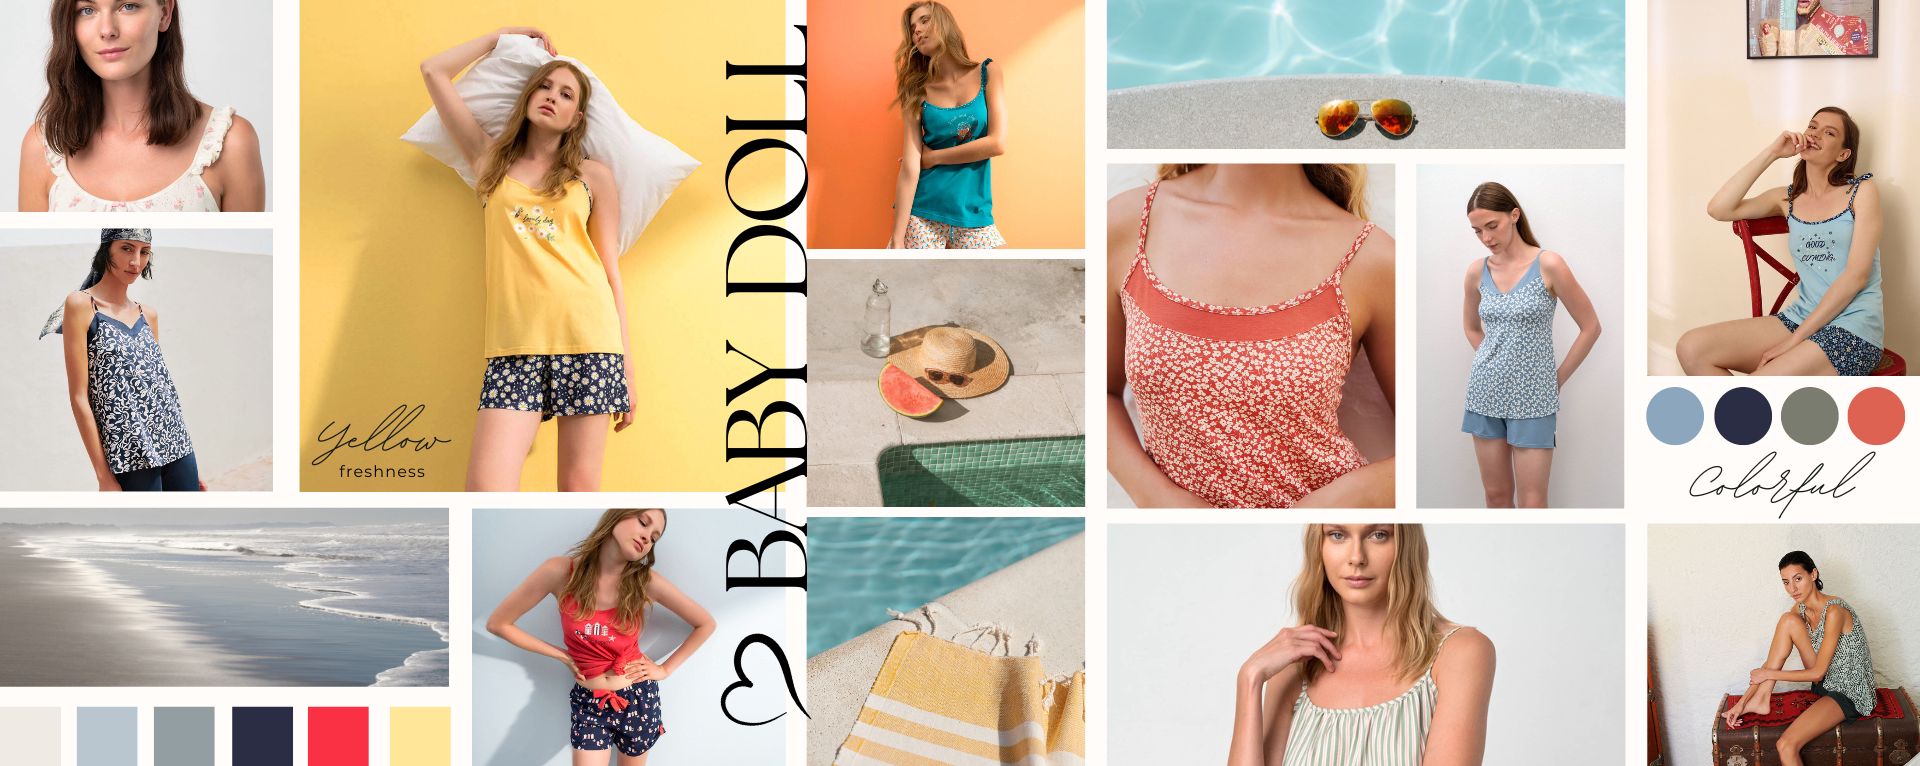 Baby_doll_stock_banner_pc_1